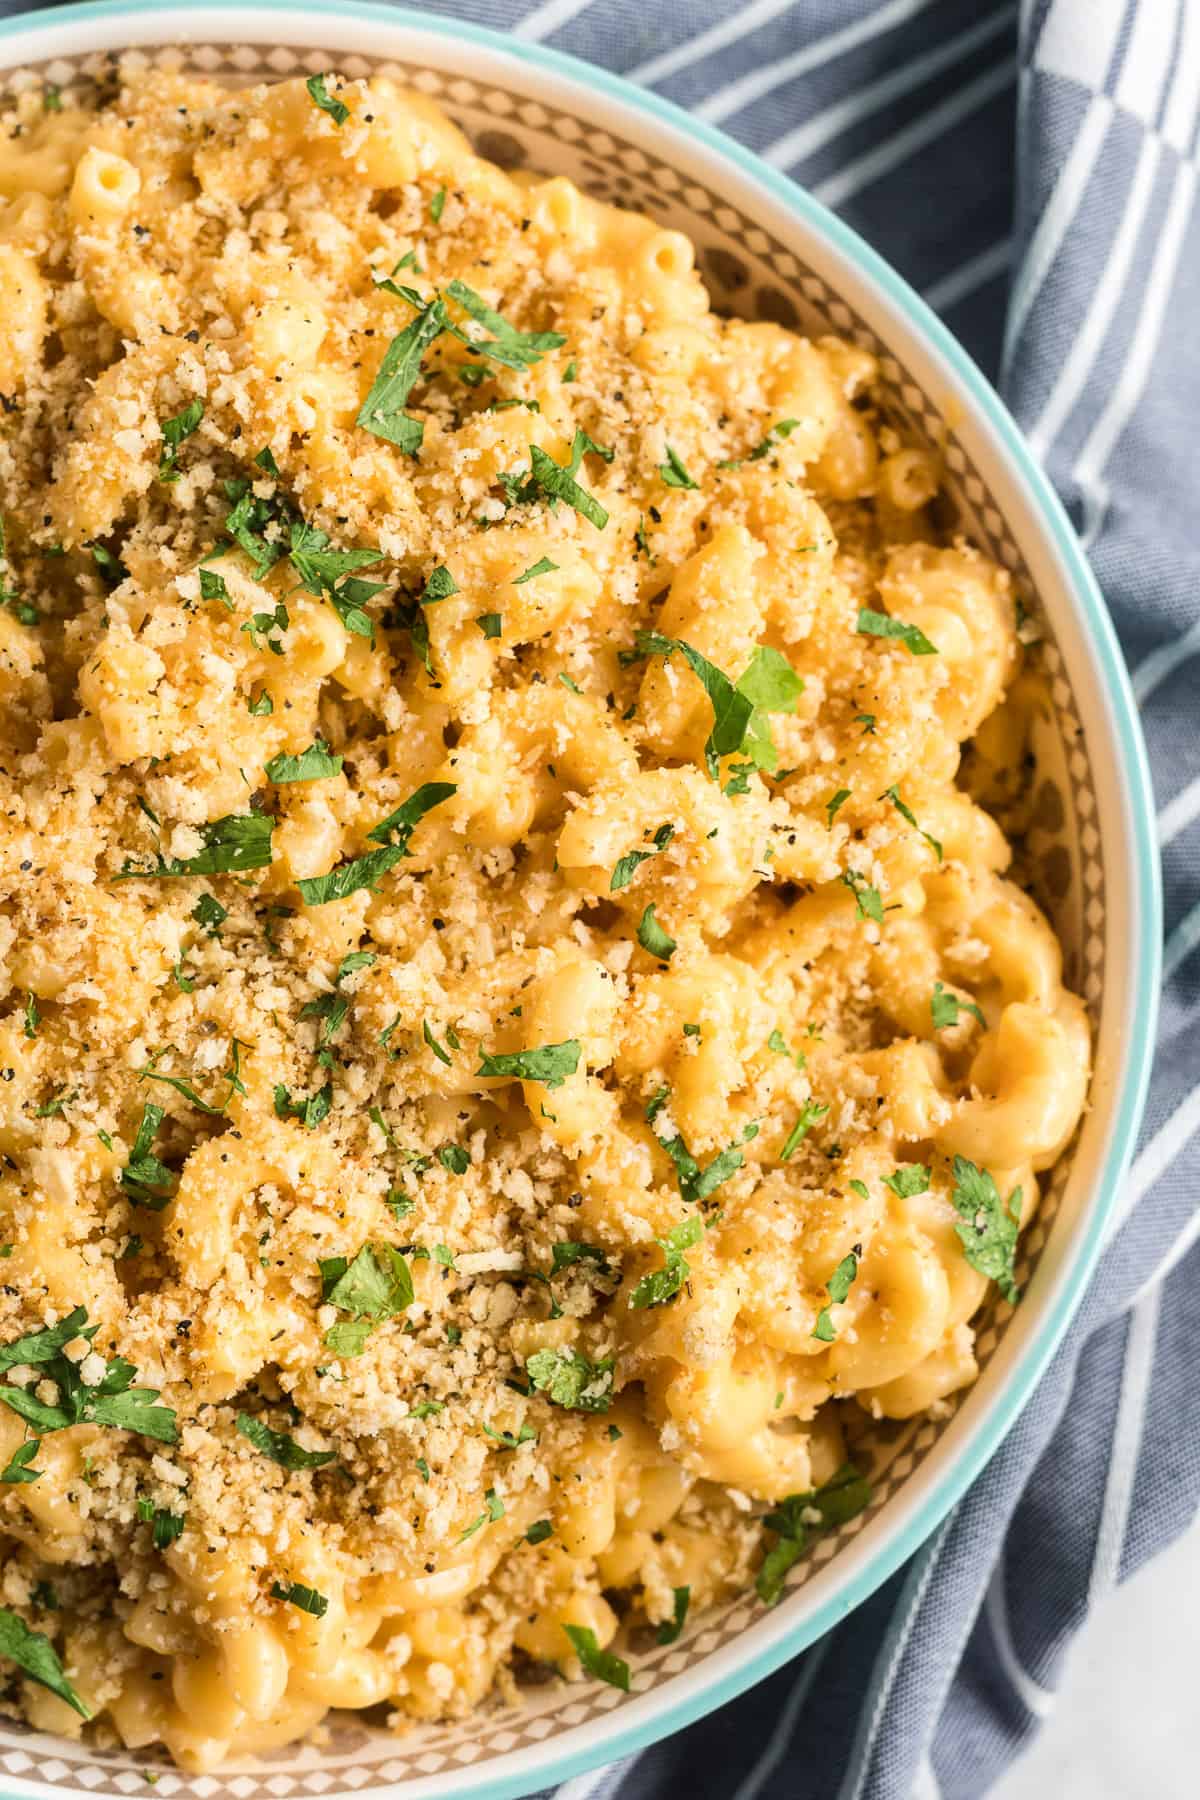 A close up image of the easy macaroni and cheese recipe in a serving bowl shot from over the top.